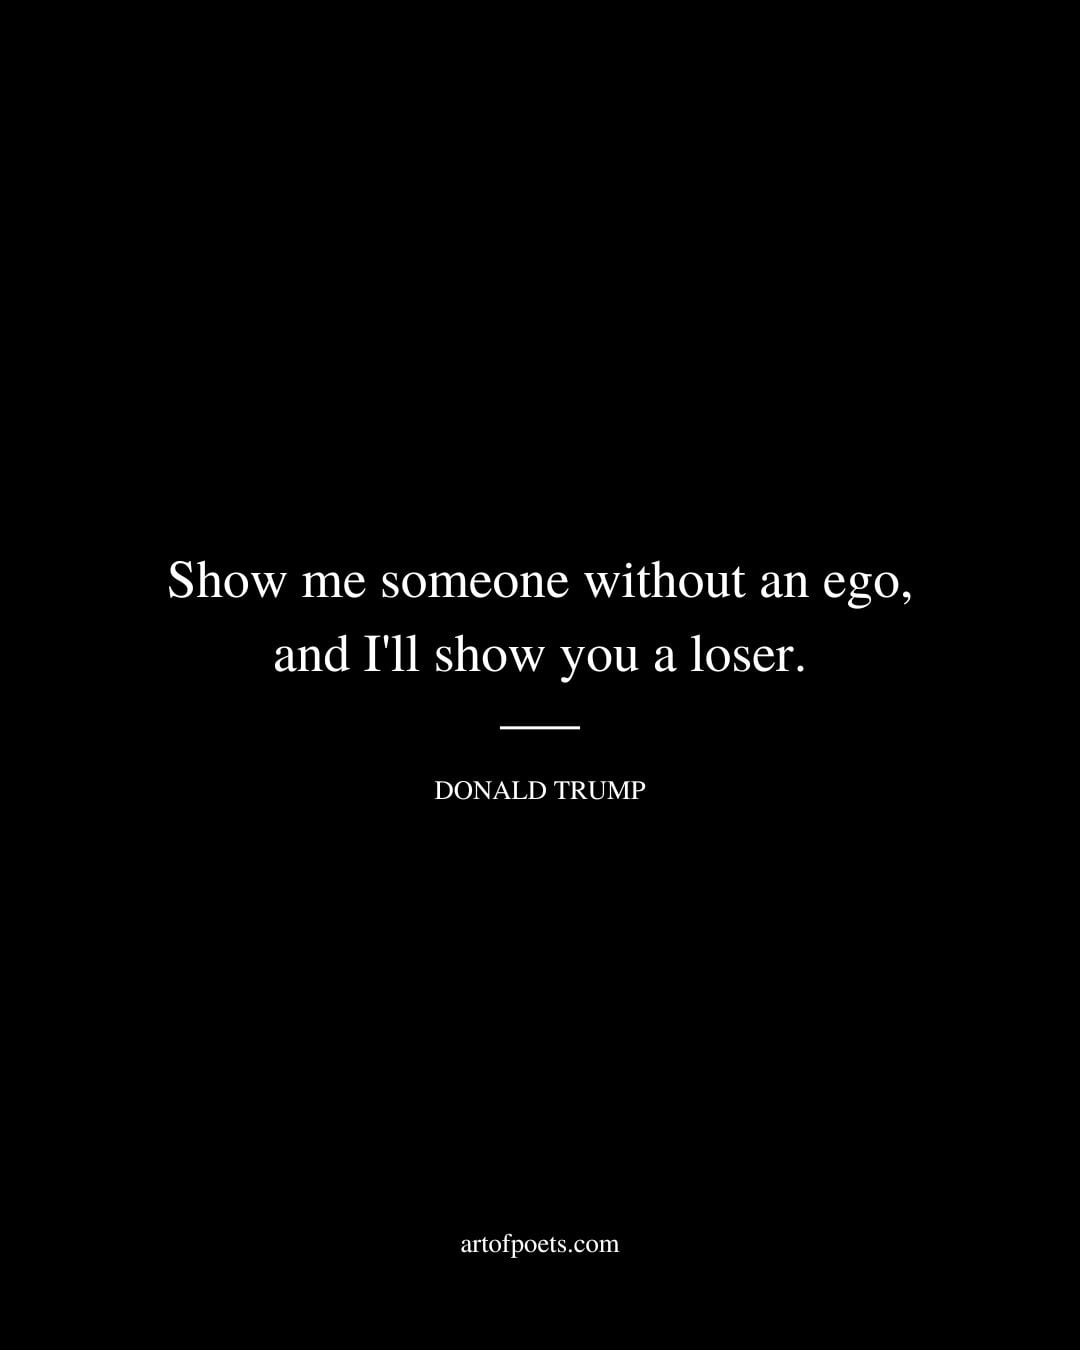 Show me someone without an ego and Ill show you a loser